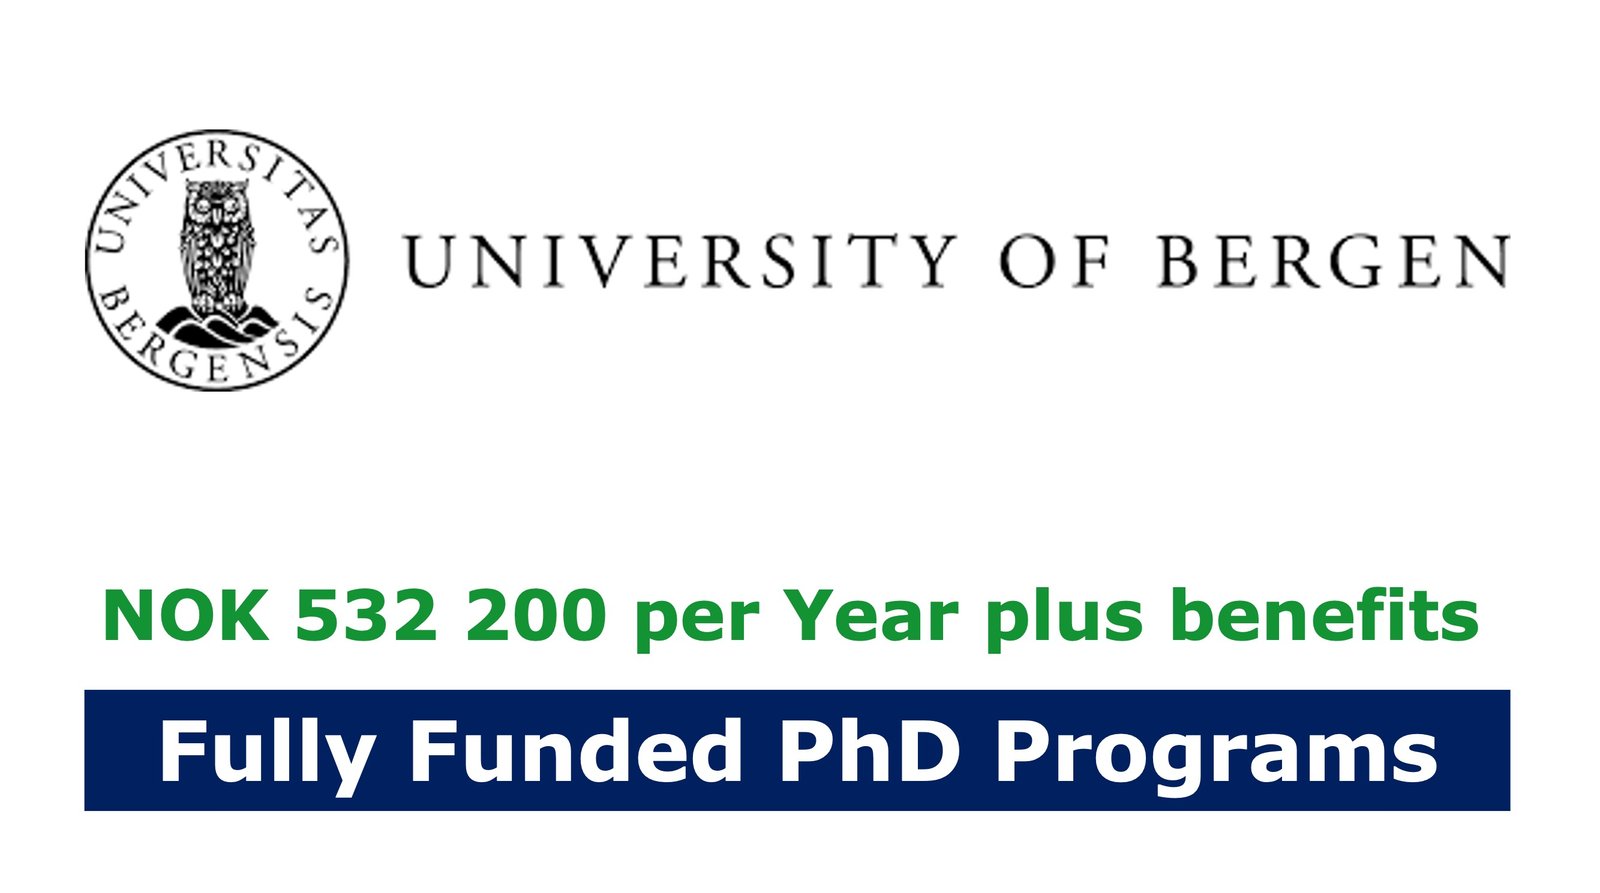 phd fully funded programs